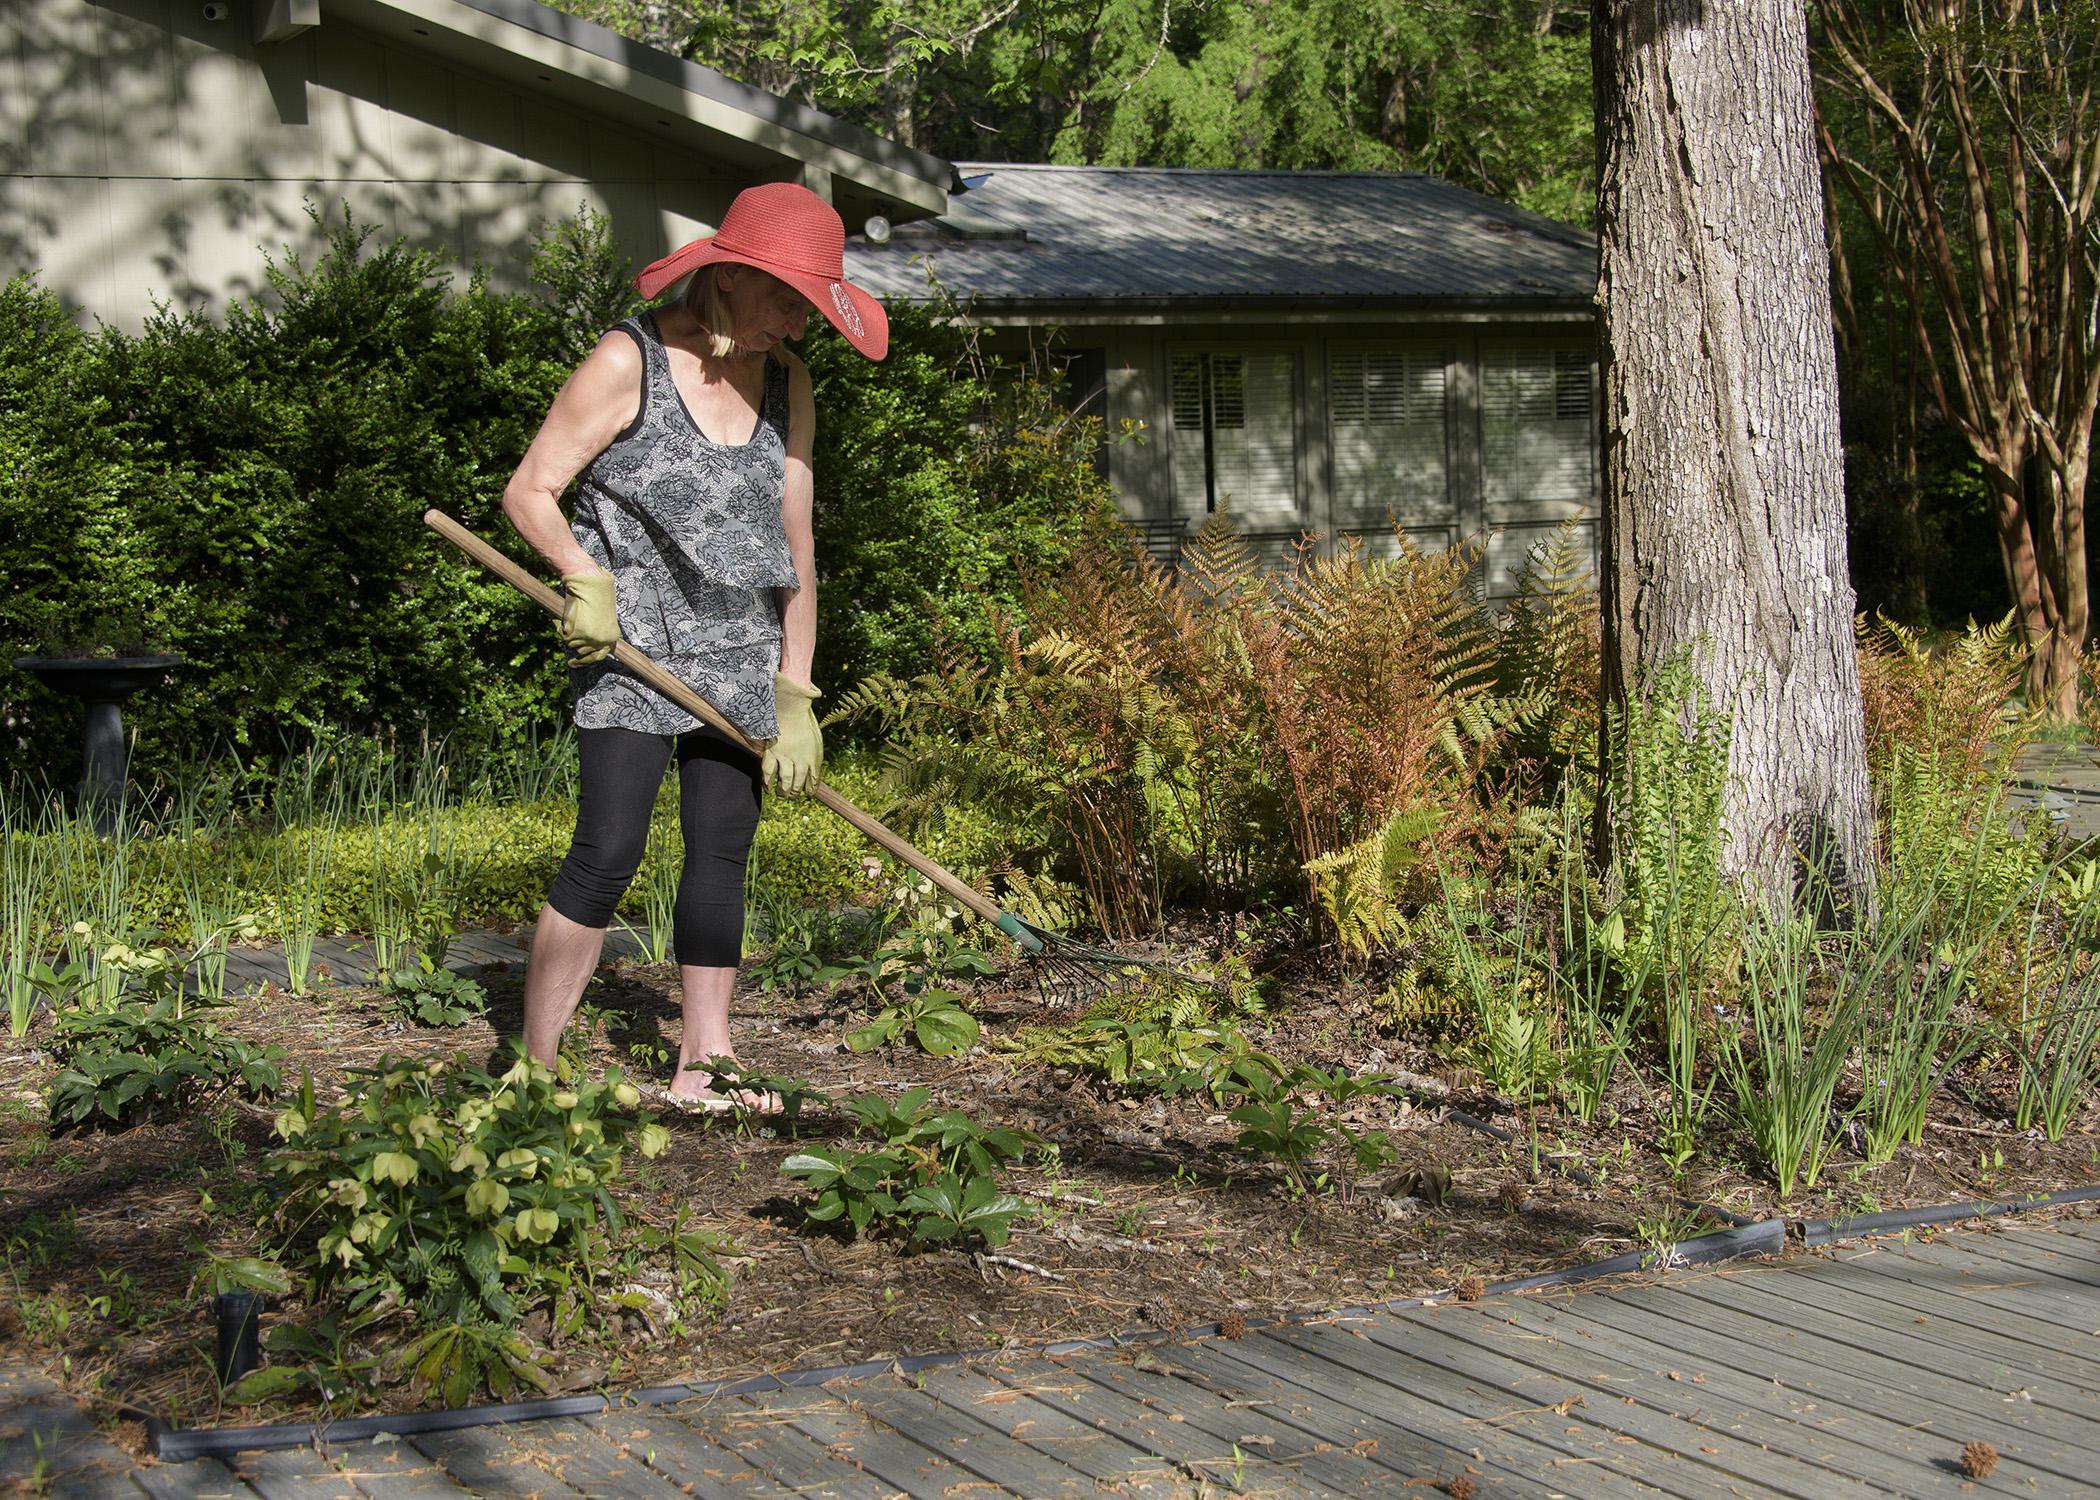 A woman uses a hoe to tend a flower bed.